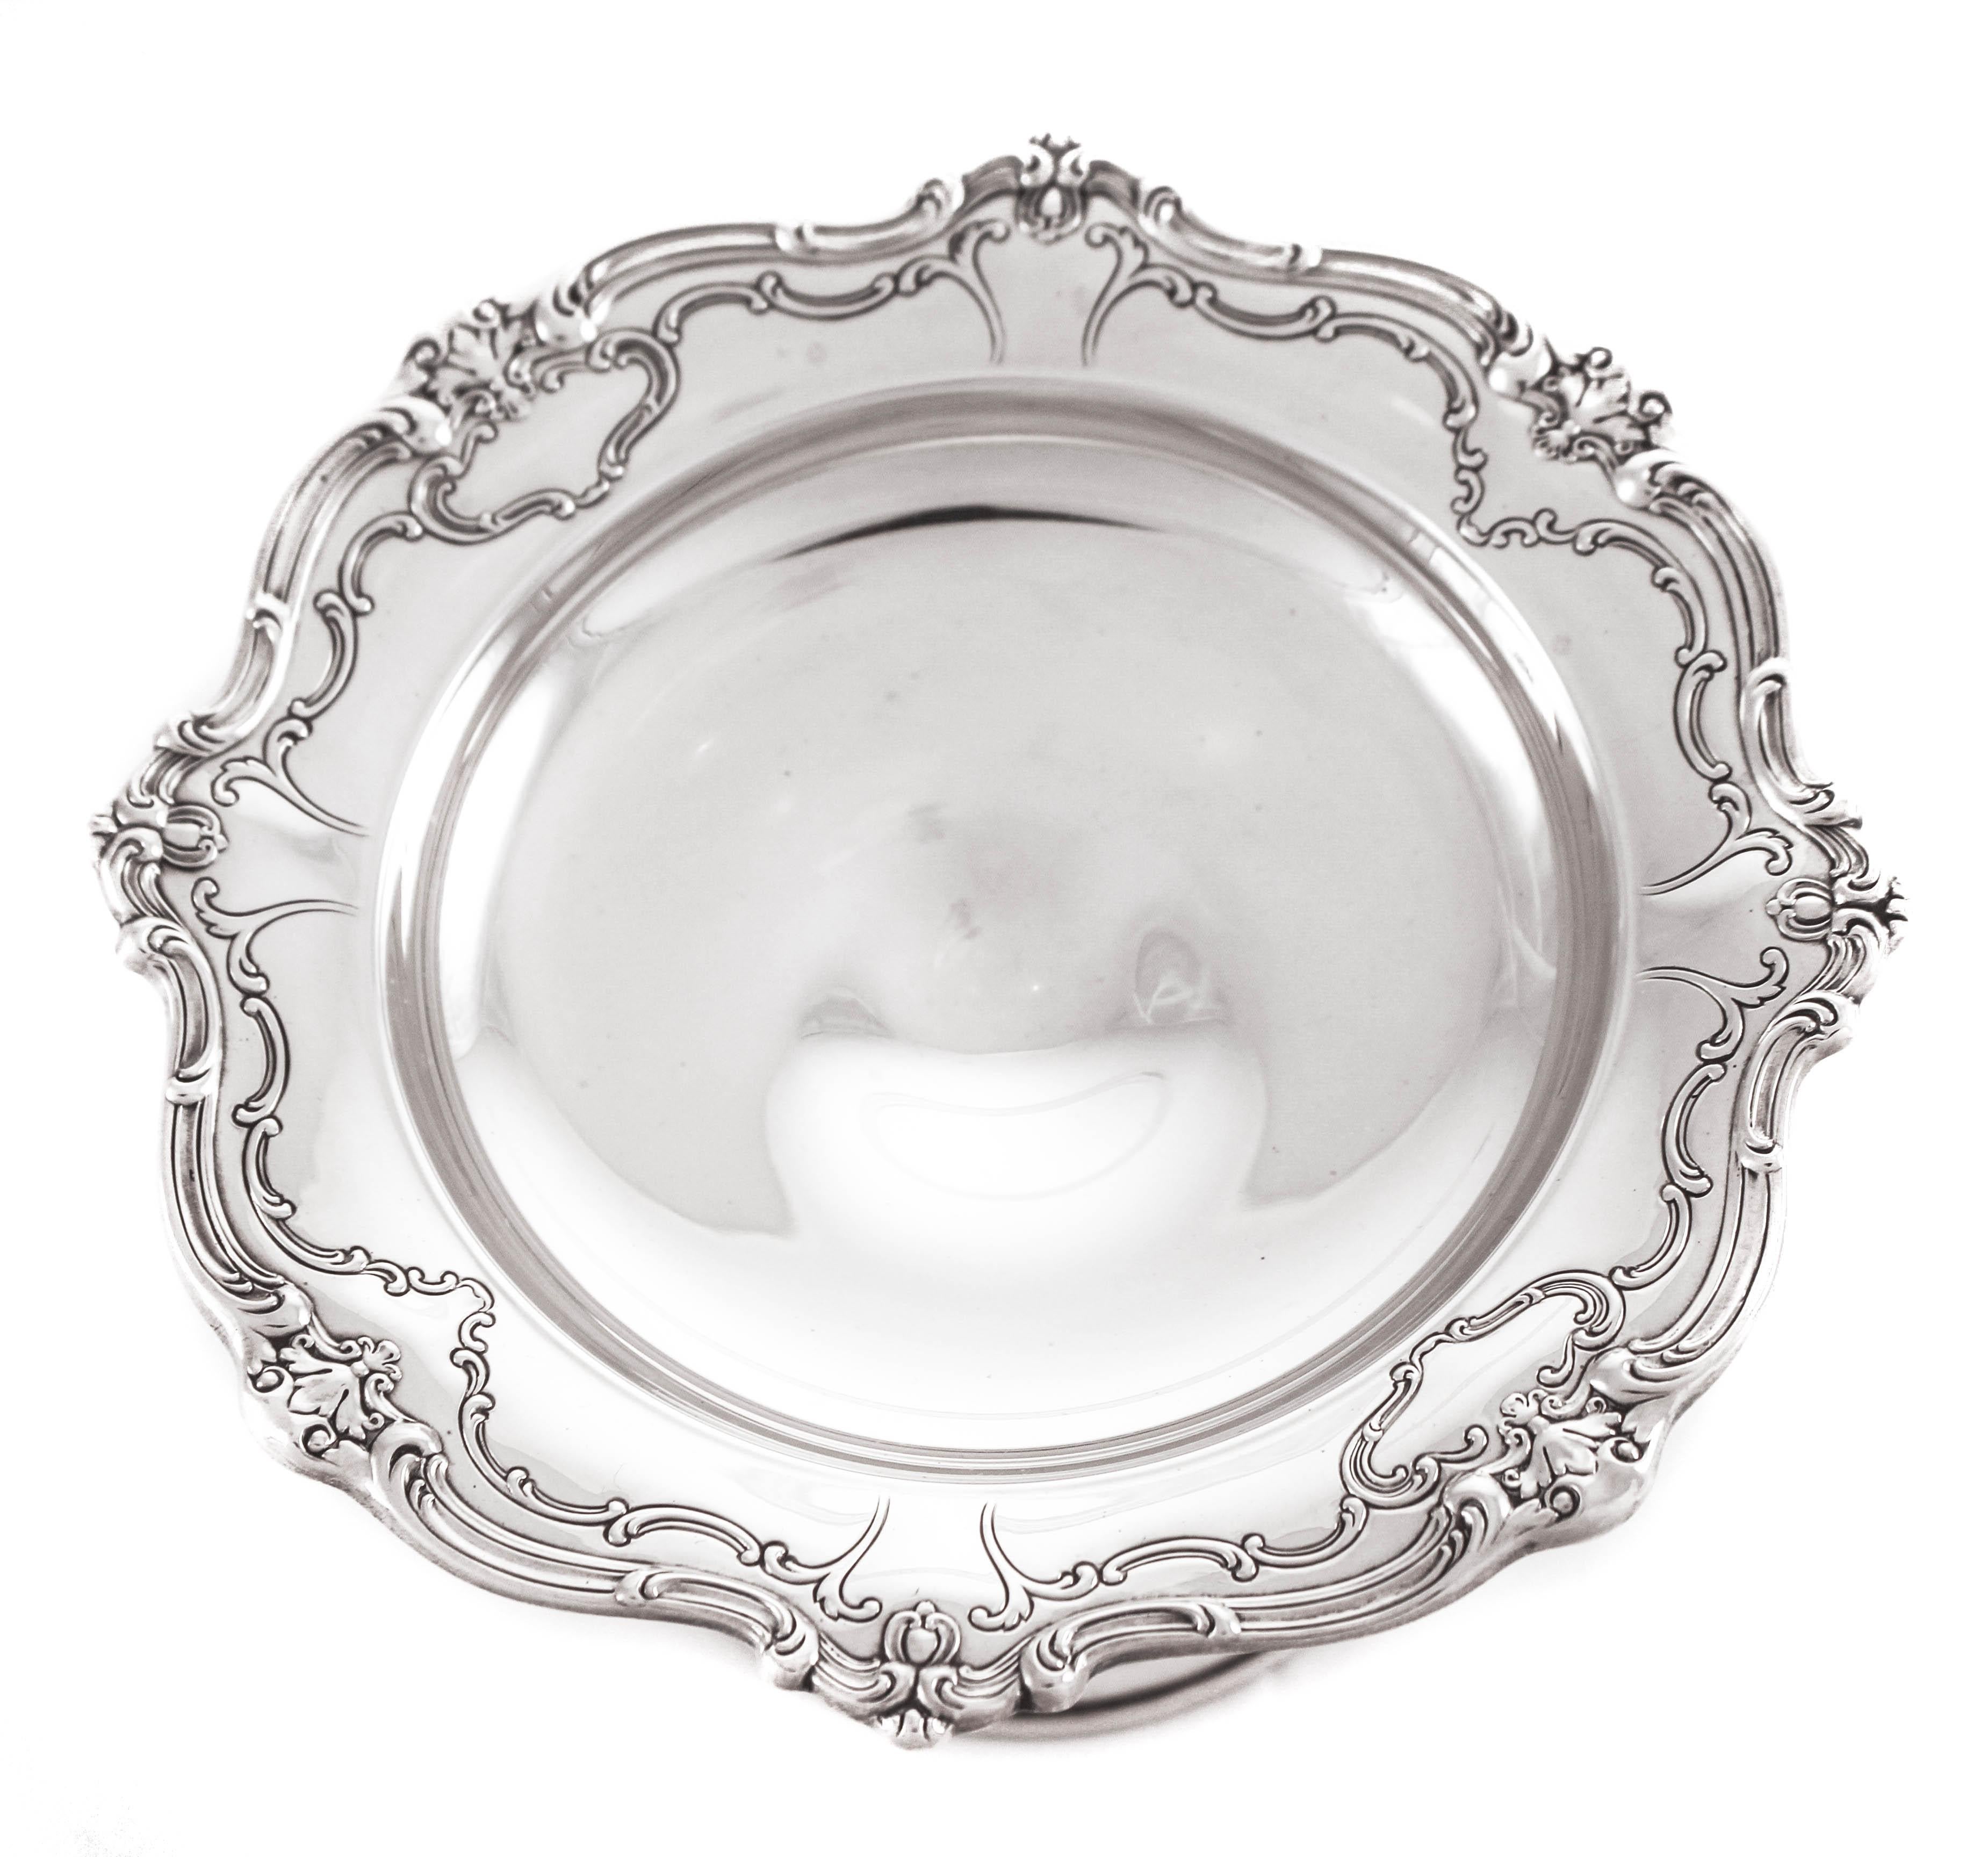 The Chantilly pattern is considered one of the most famous patterns ever made. It’s name has become synonymous with the Gorham Company. First introduced in 1895, it has delighted customers ever since then. They have a scalloped edge with an etching